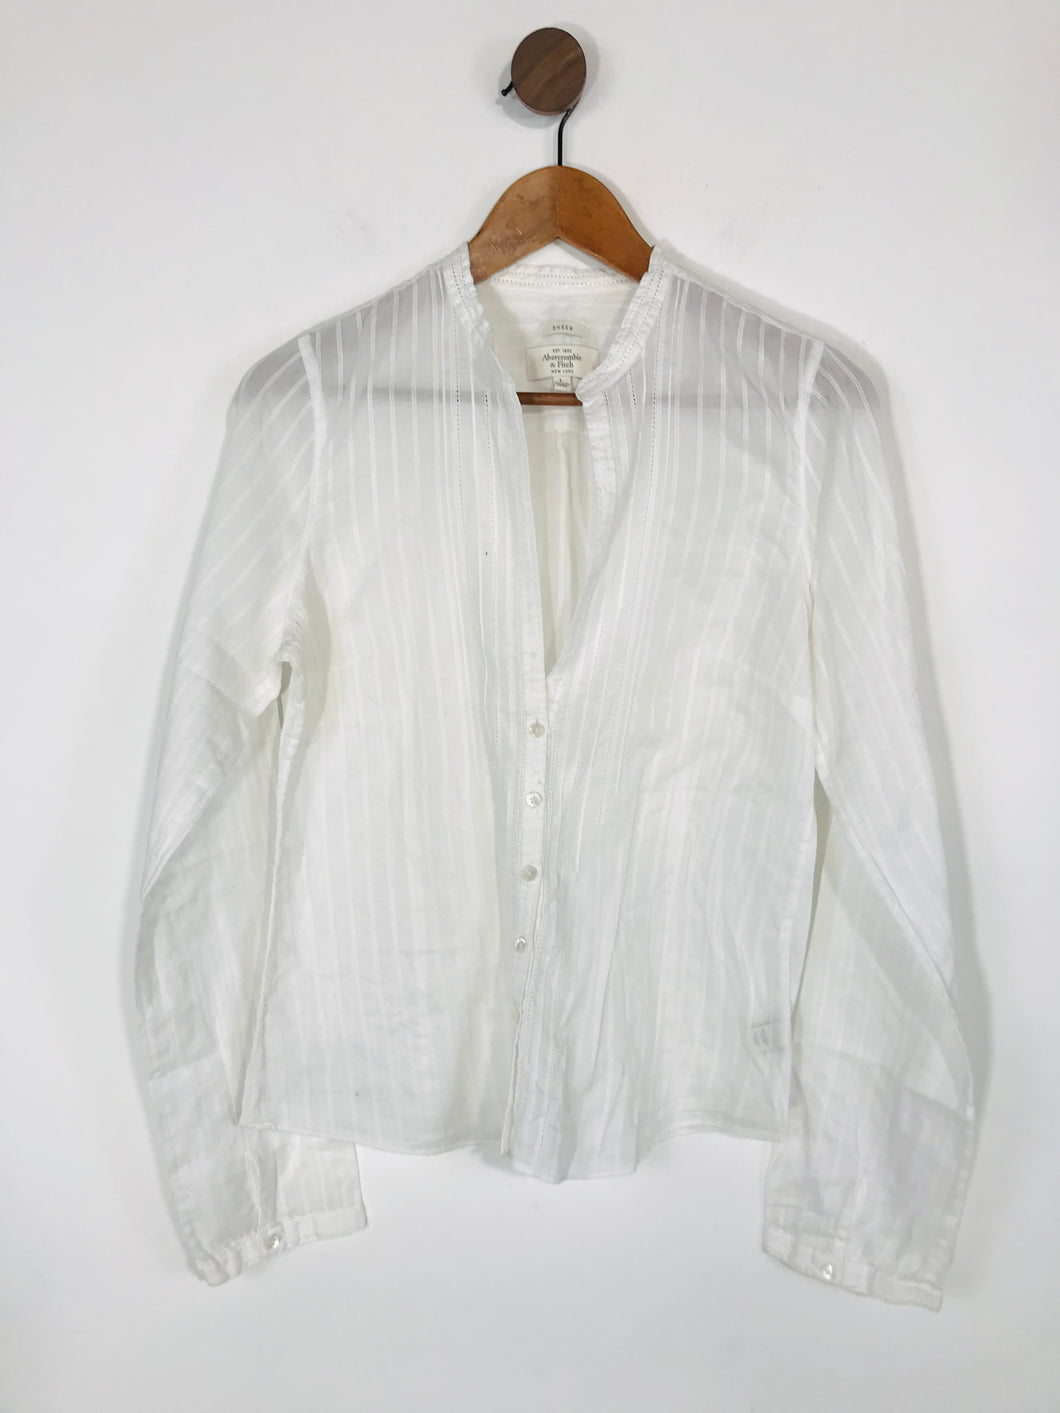 Abercrombie & Fitch Women's Sheer Collarless Button-Up Shirt | L UK14 | White